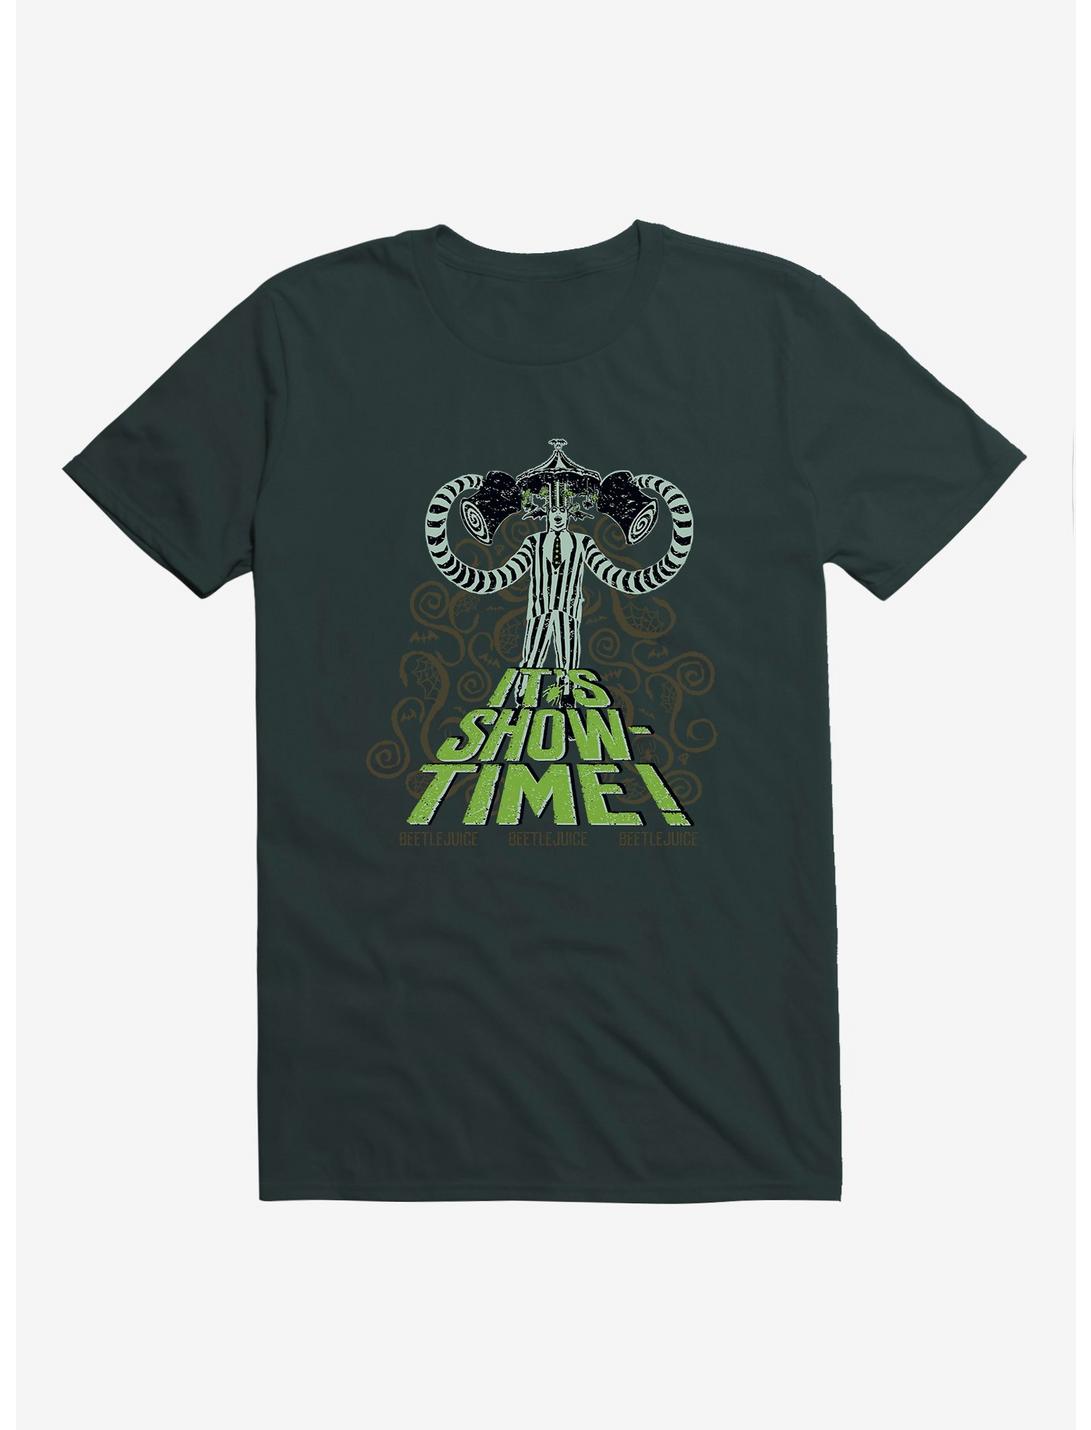 Beetlejuice It's Showtime T-Shirt, FOREST GREEN, hi-res